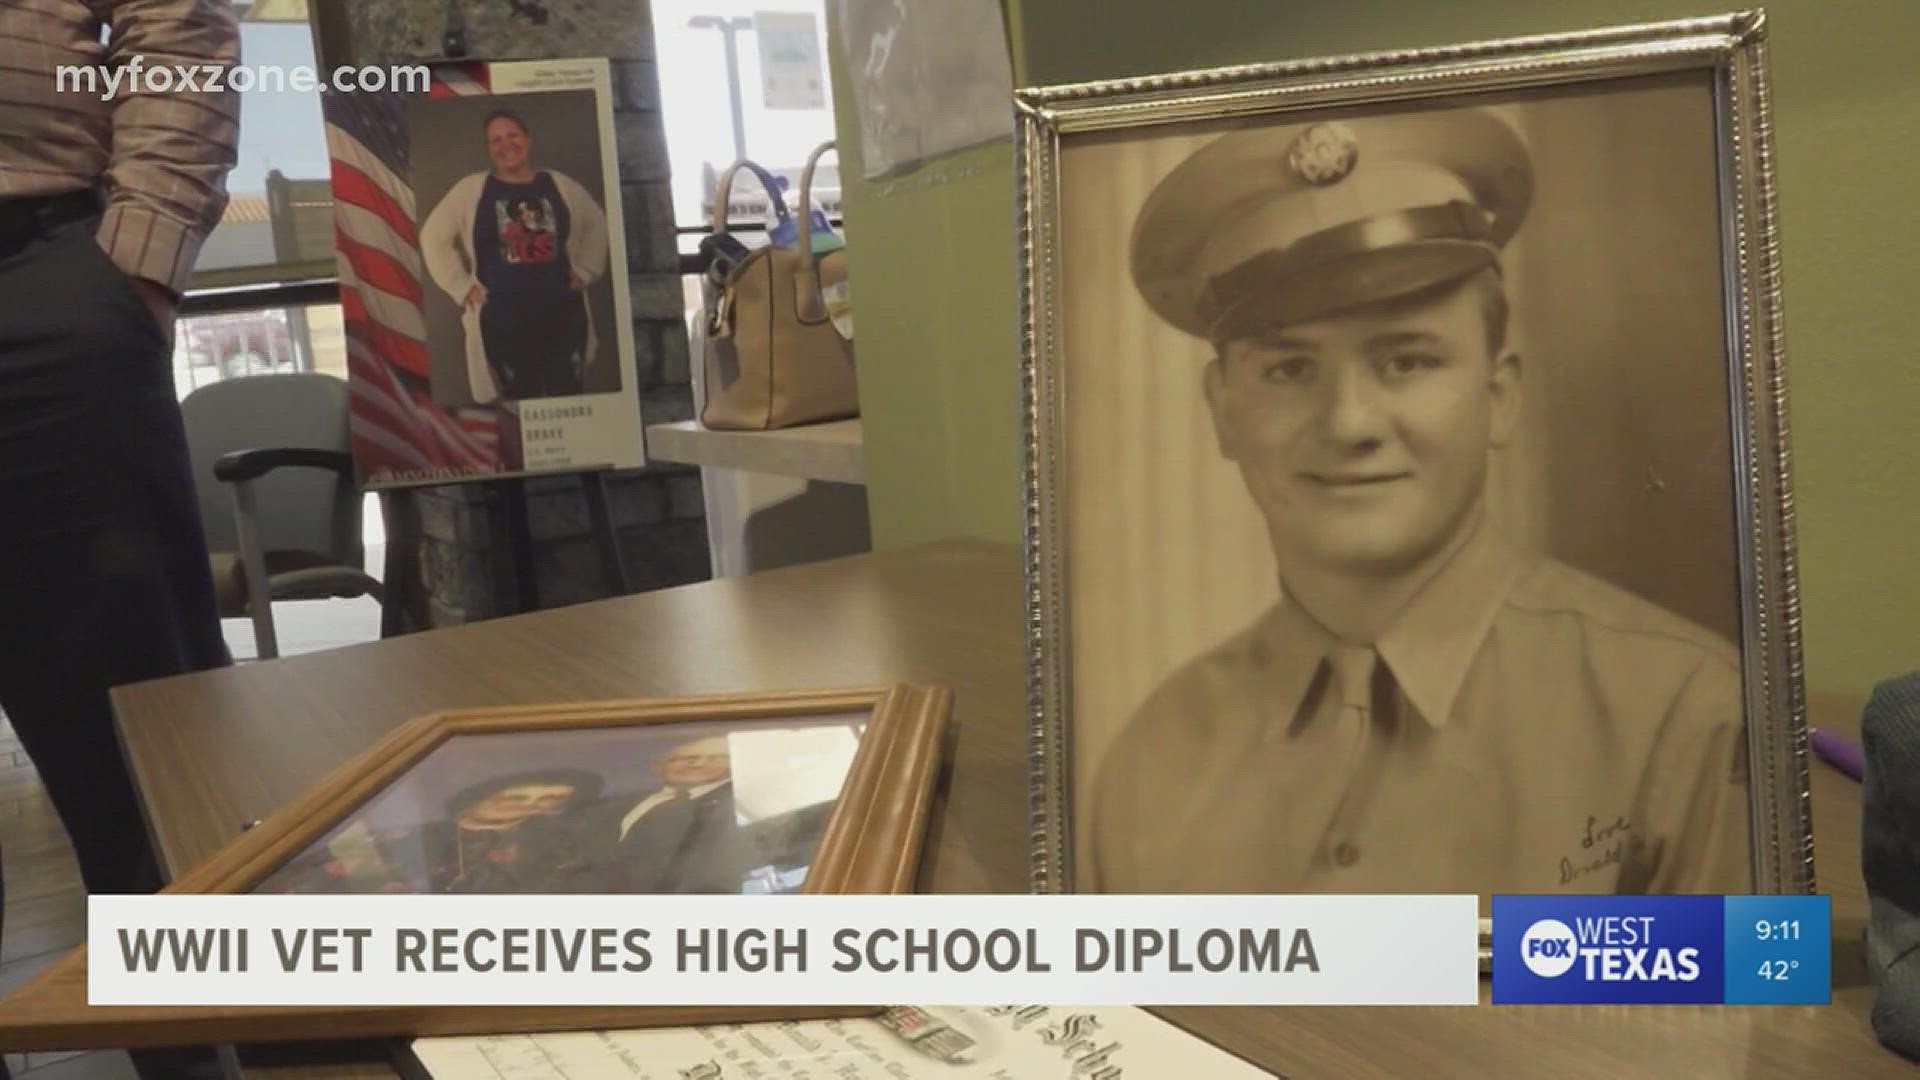 Donald Huisenga receives the high school diploma he missed when he was drafted in 1943.